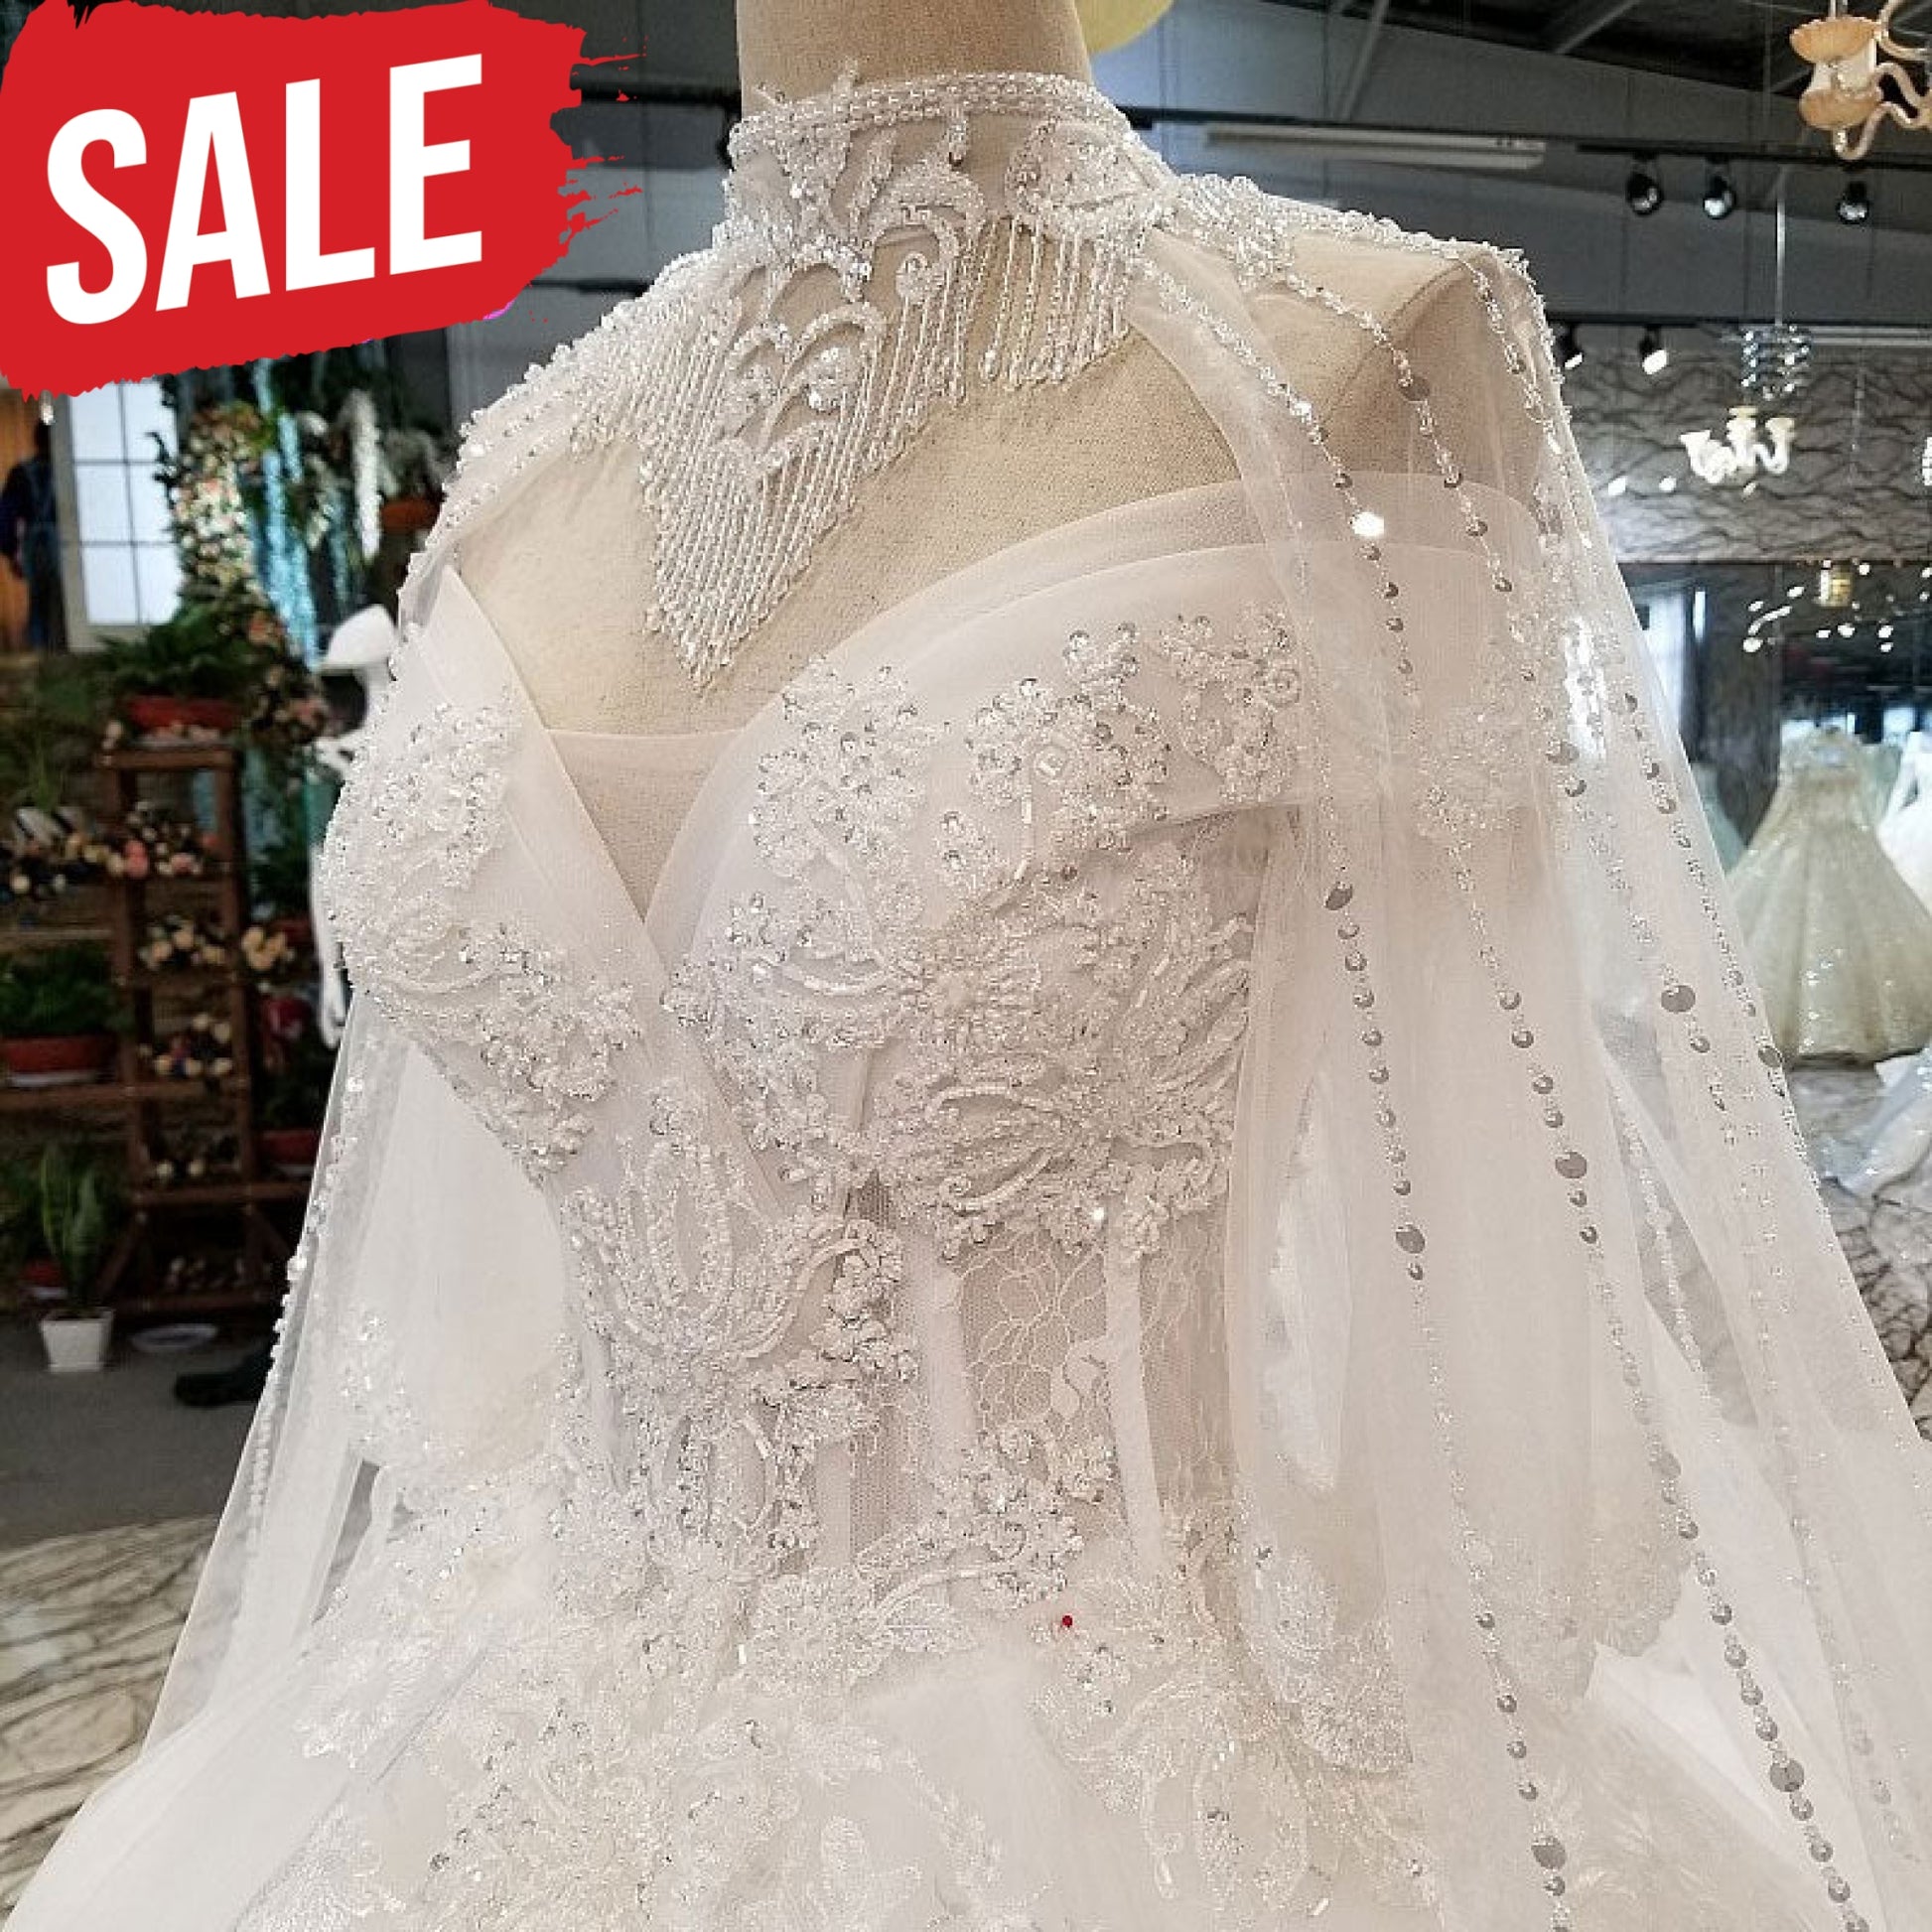 Lace Bridal Robes Bride Gownsing Dress Lace Bridal Robes Bride Gownsing Dress Lace Bridal Robes Bride Gownsing DressLace Bridal Robes Bride Gownsing Dress Lace Bridal Robes Bride Gownsing Dress